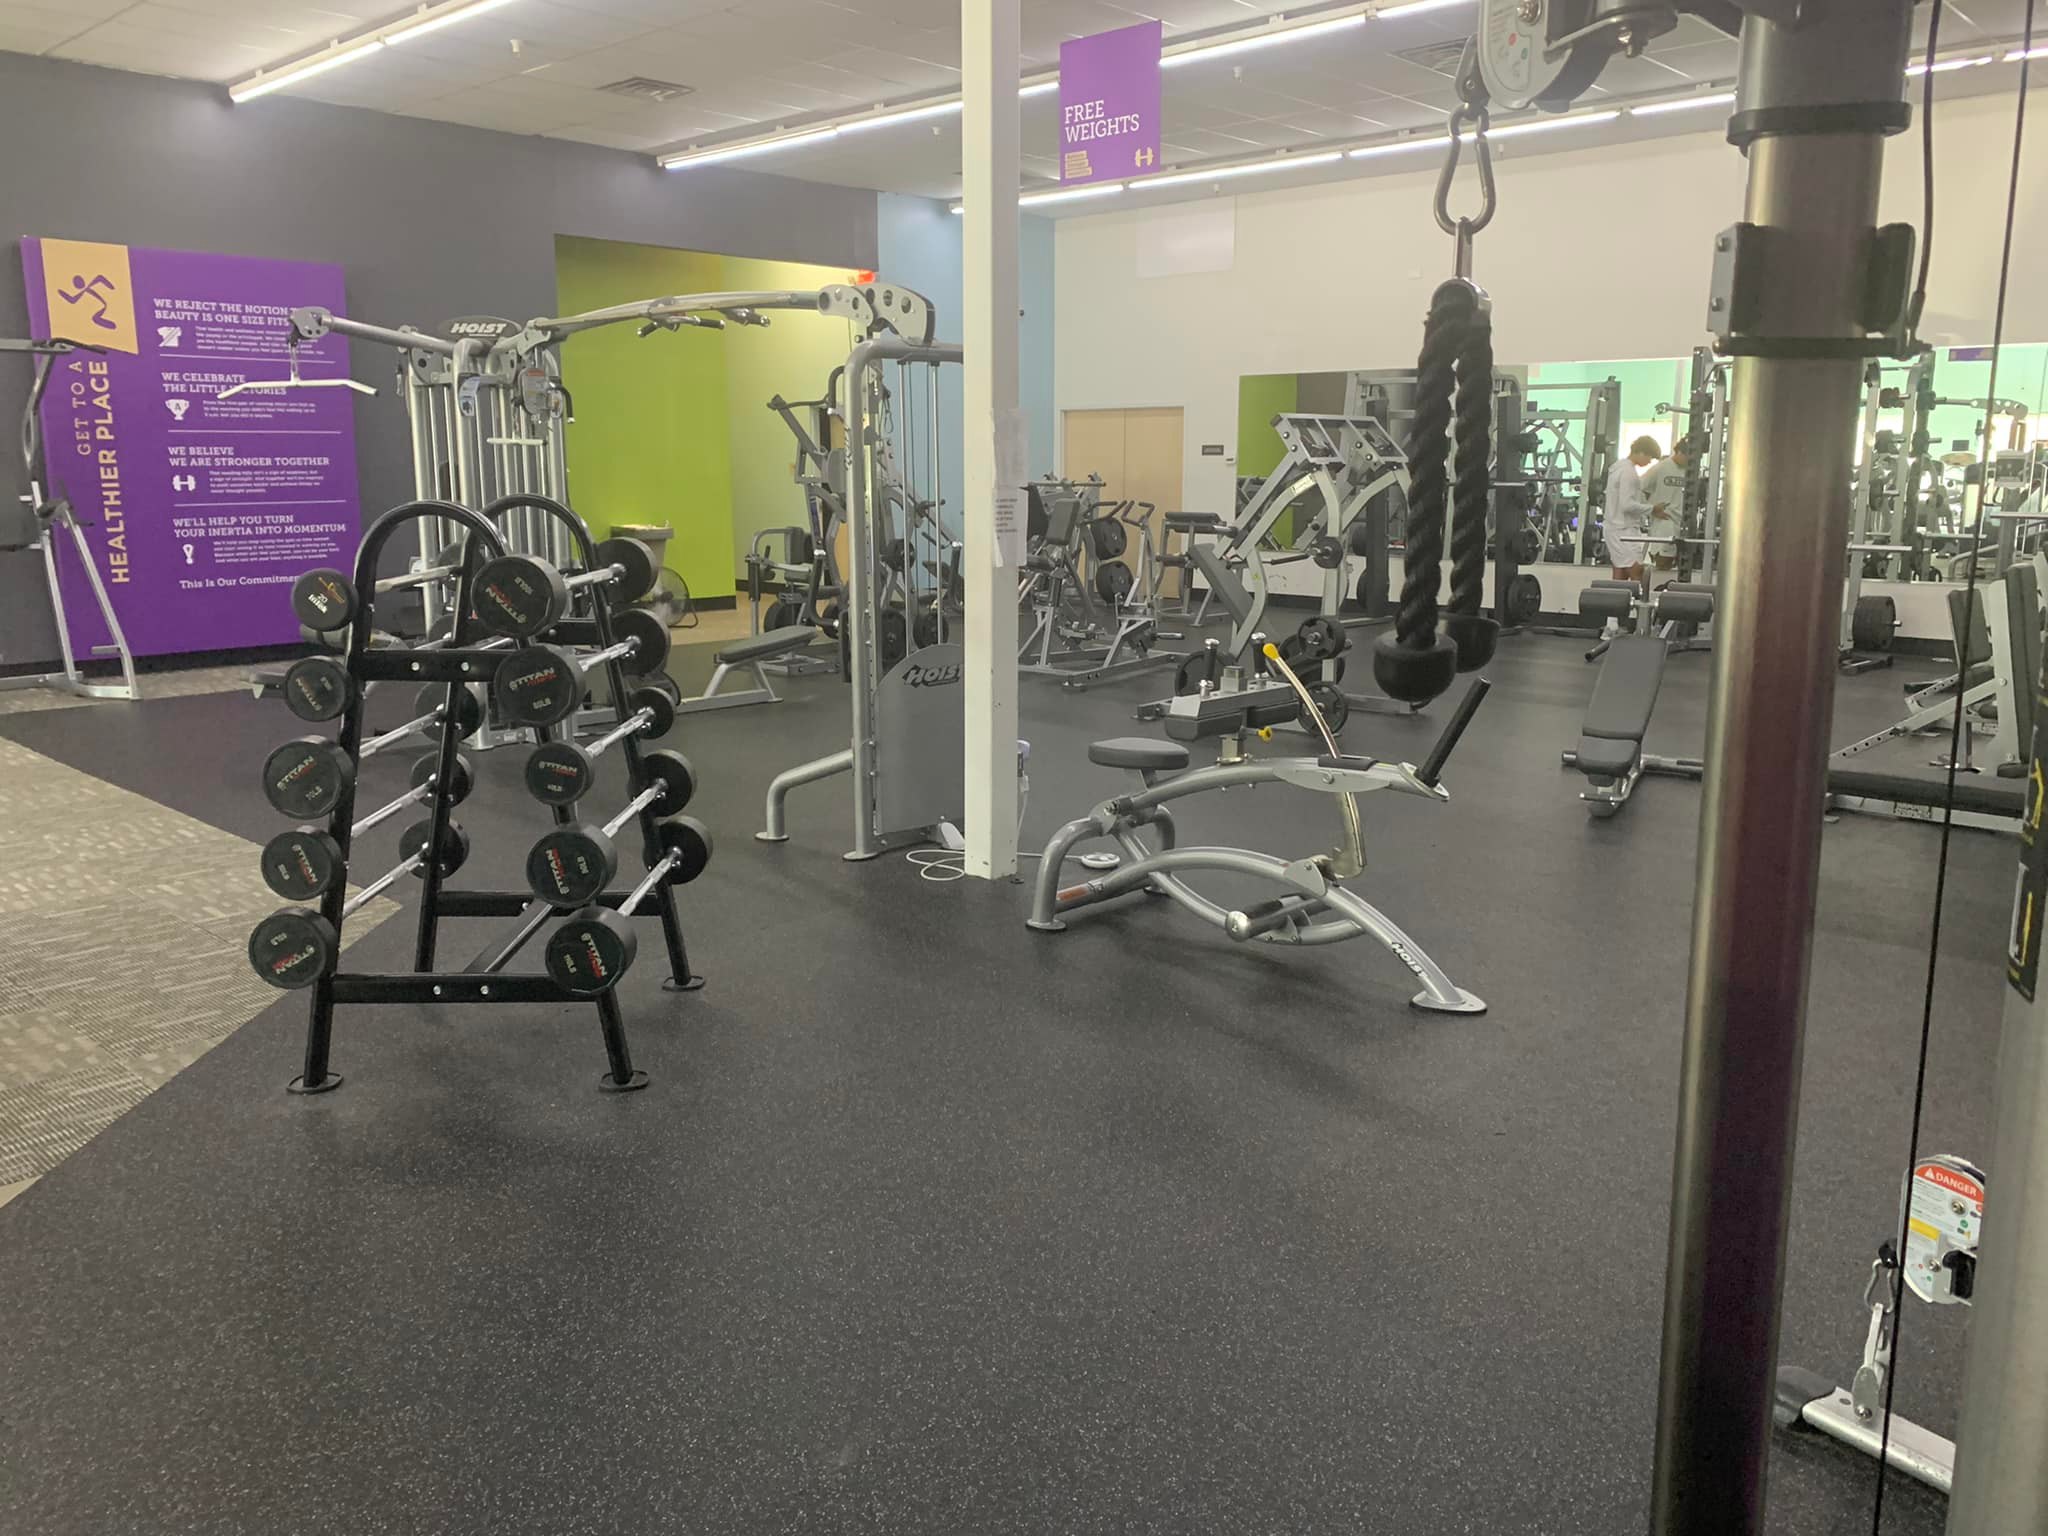 Anytime Fitness 465 Pike St ste c, Monroeville Alabama 36460